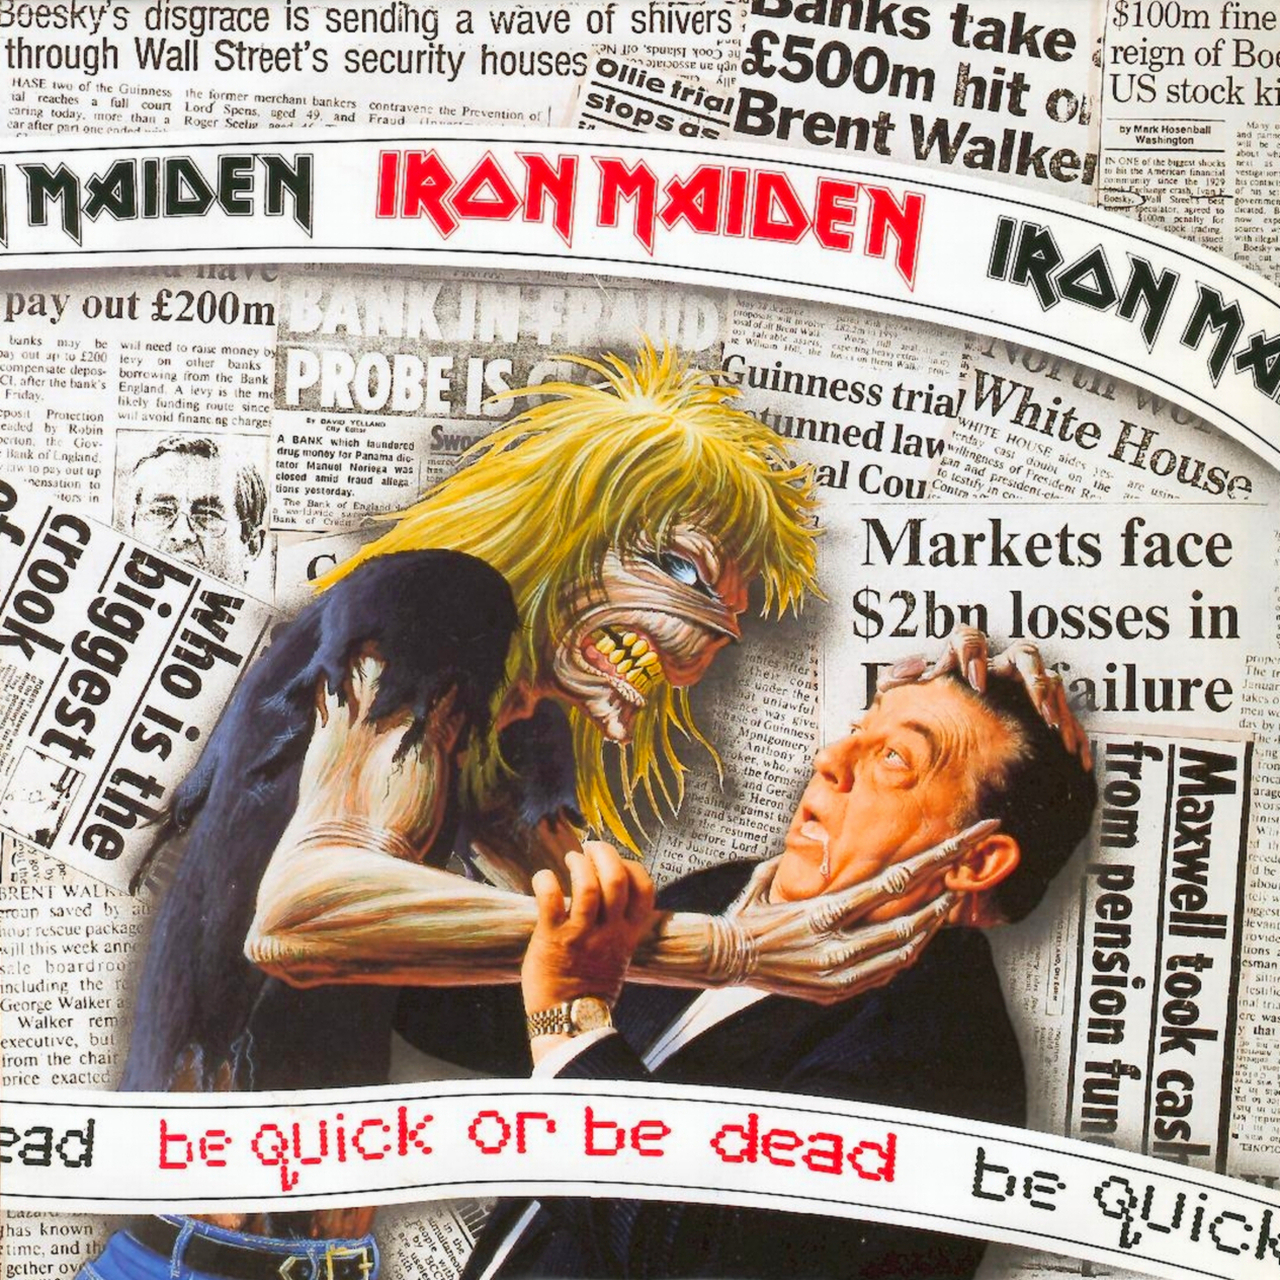 single_iron_maiden_be_quick_or_be_dead.jpg